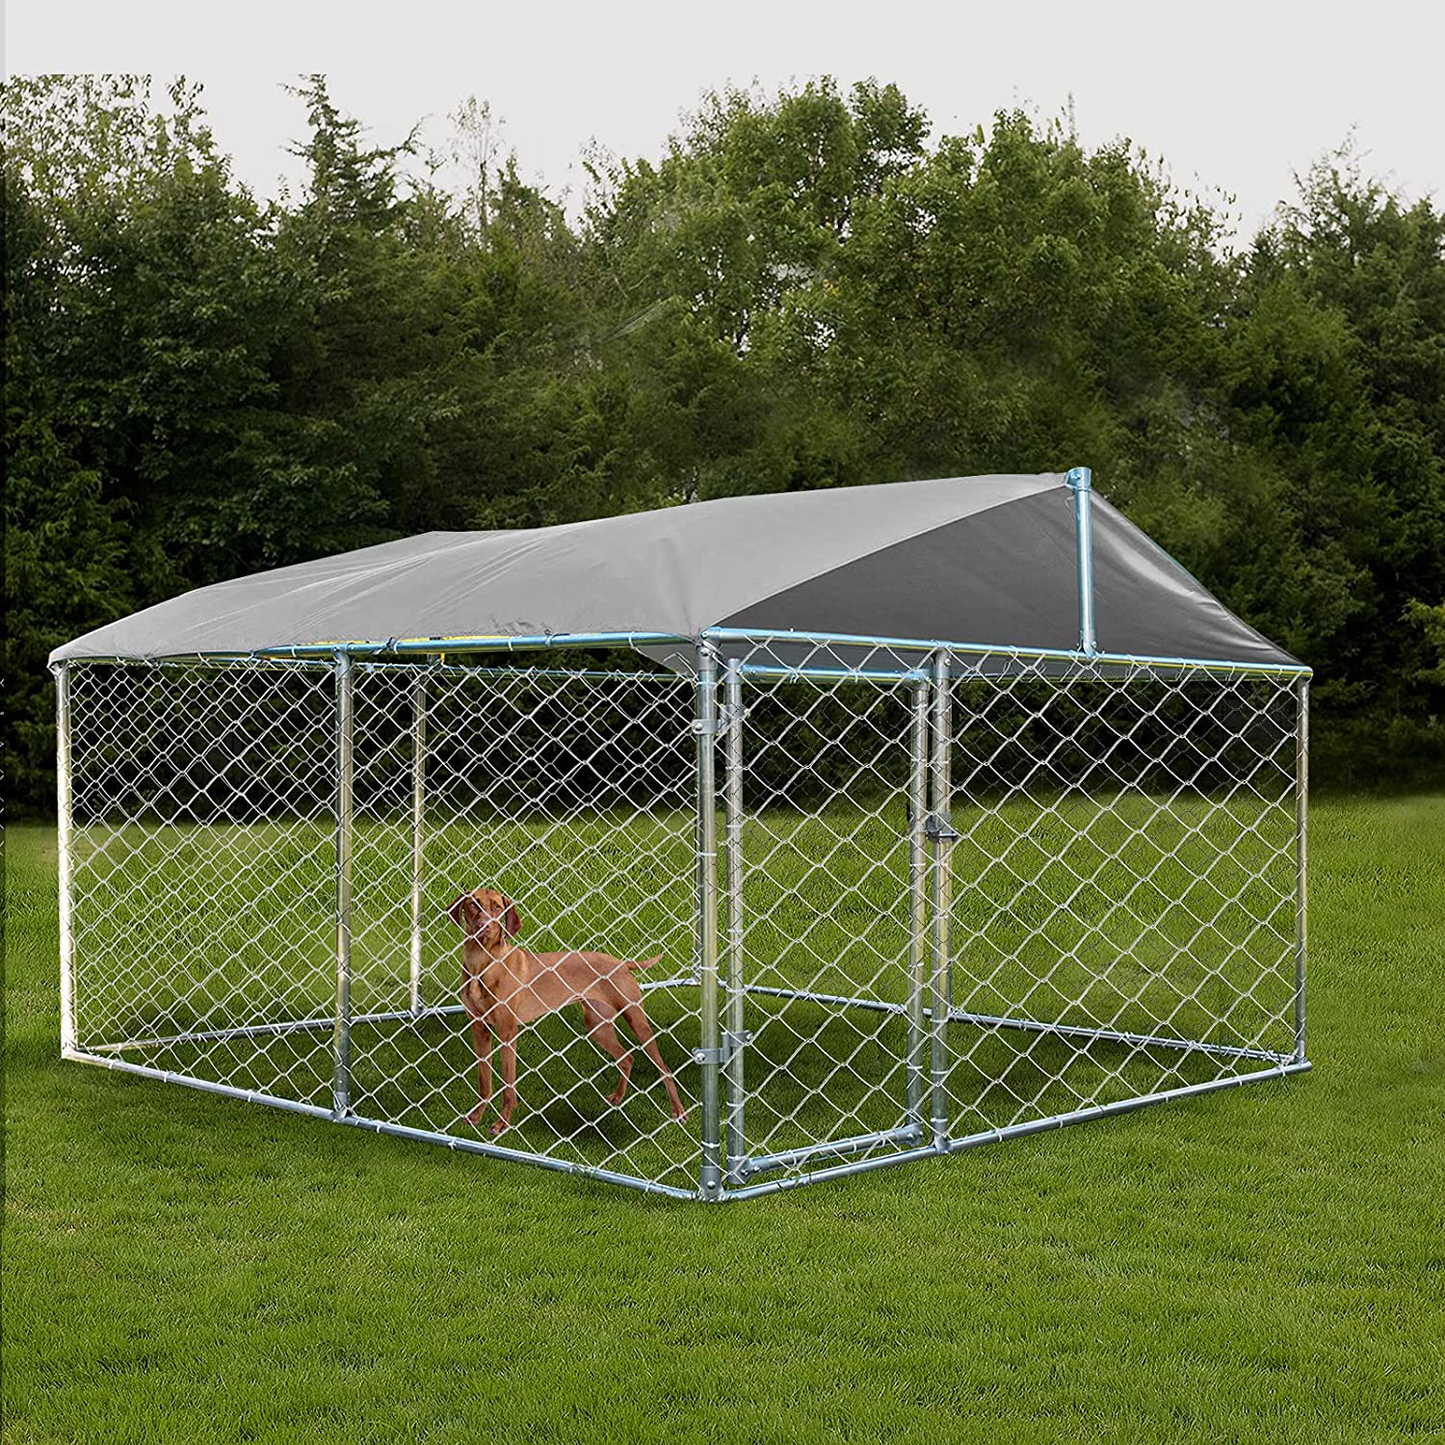 MAGIC UNION outside Dog Kennels Playpen for Dogs Outdoor Dog Fence with Water-Roof Cover for Backyard Dog Run House